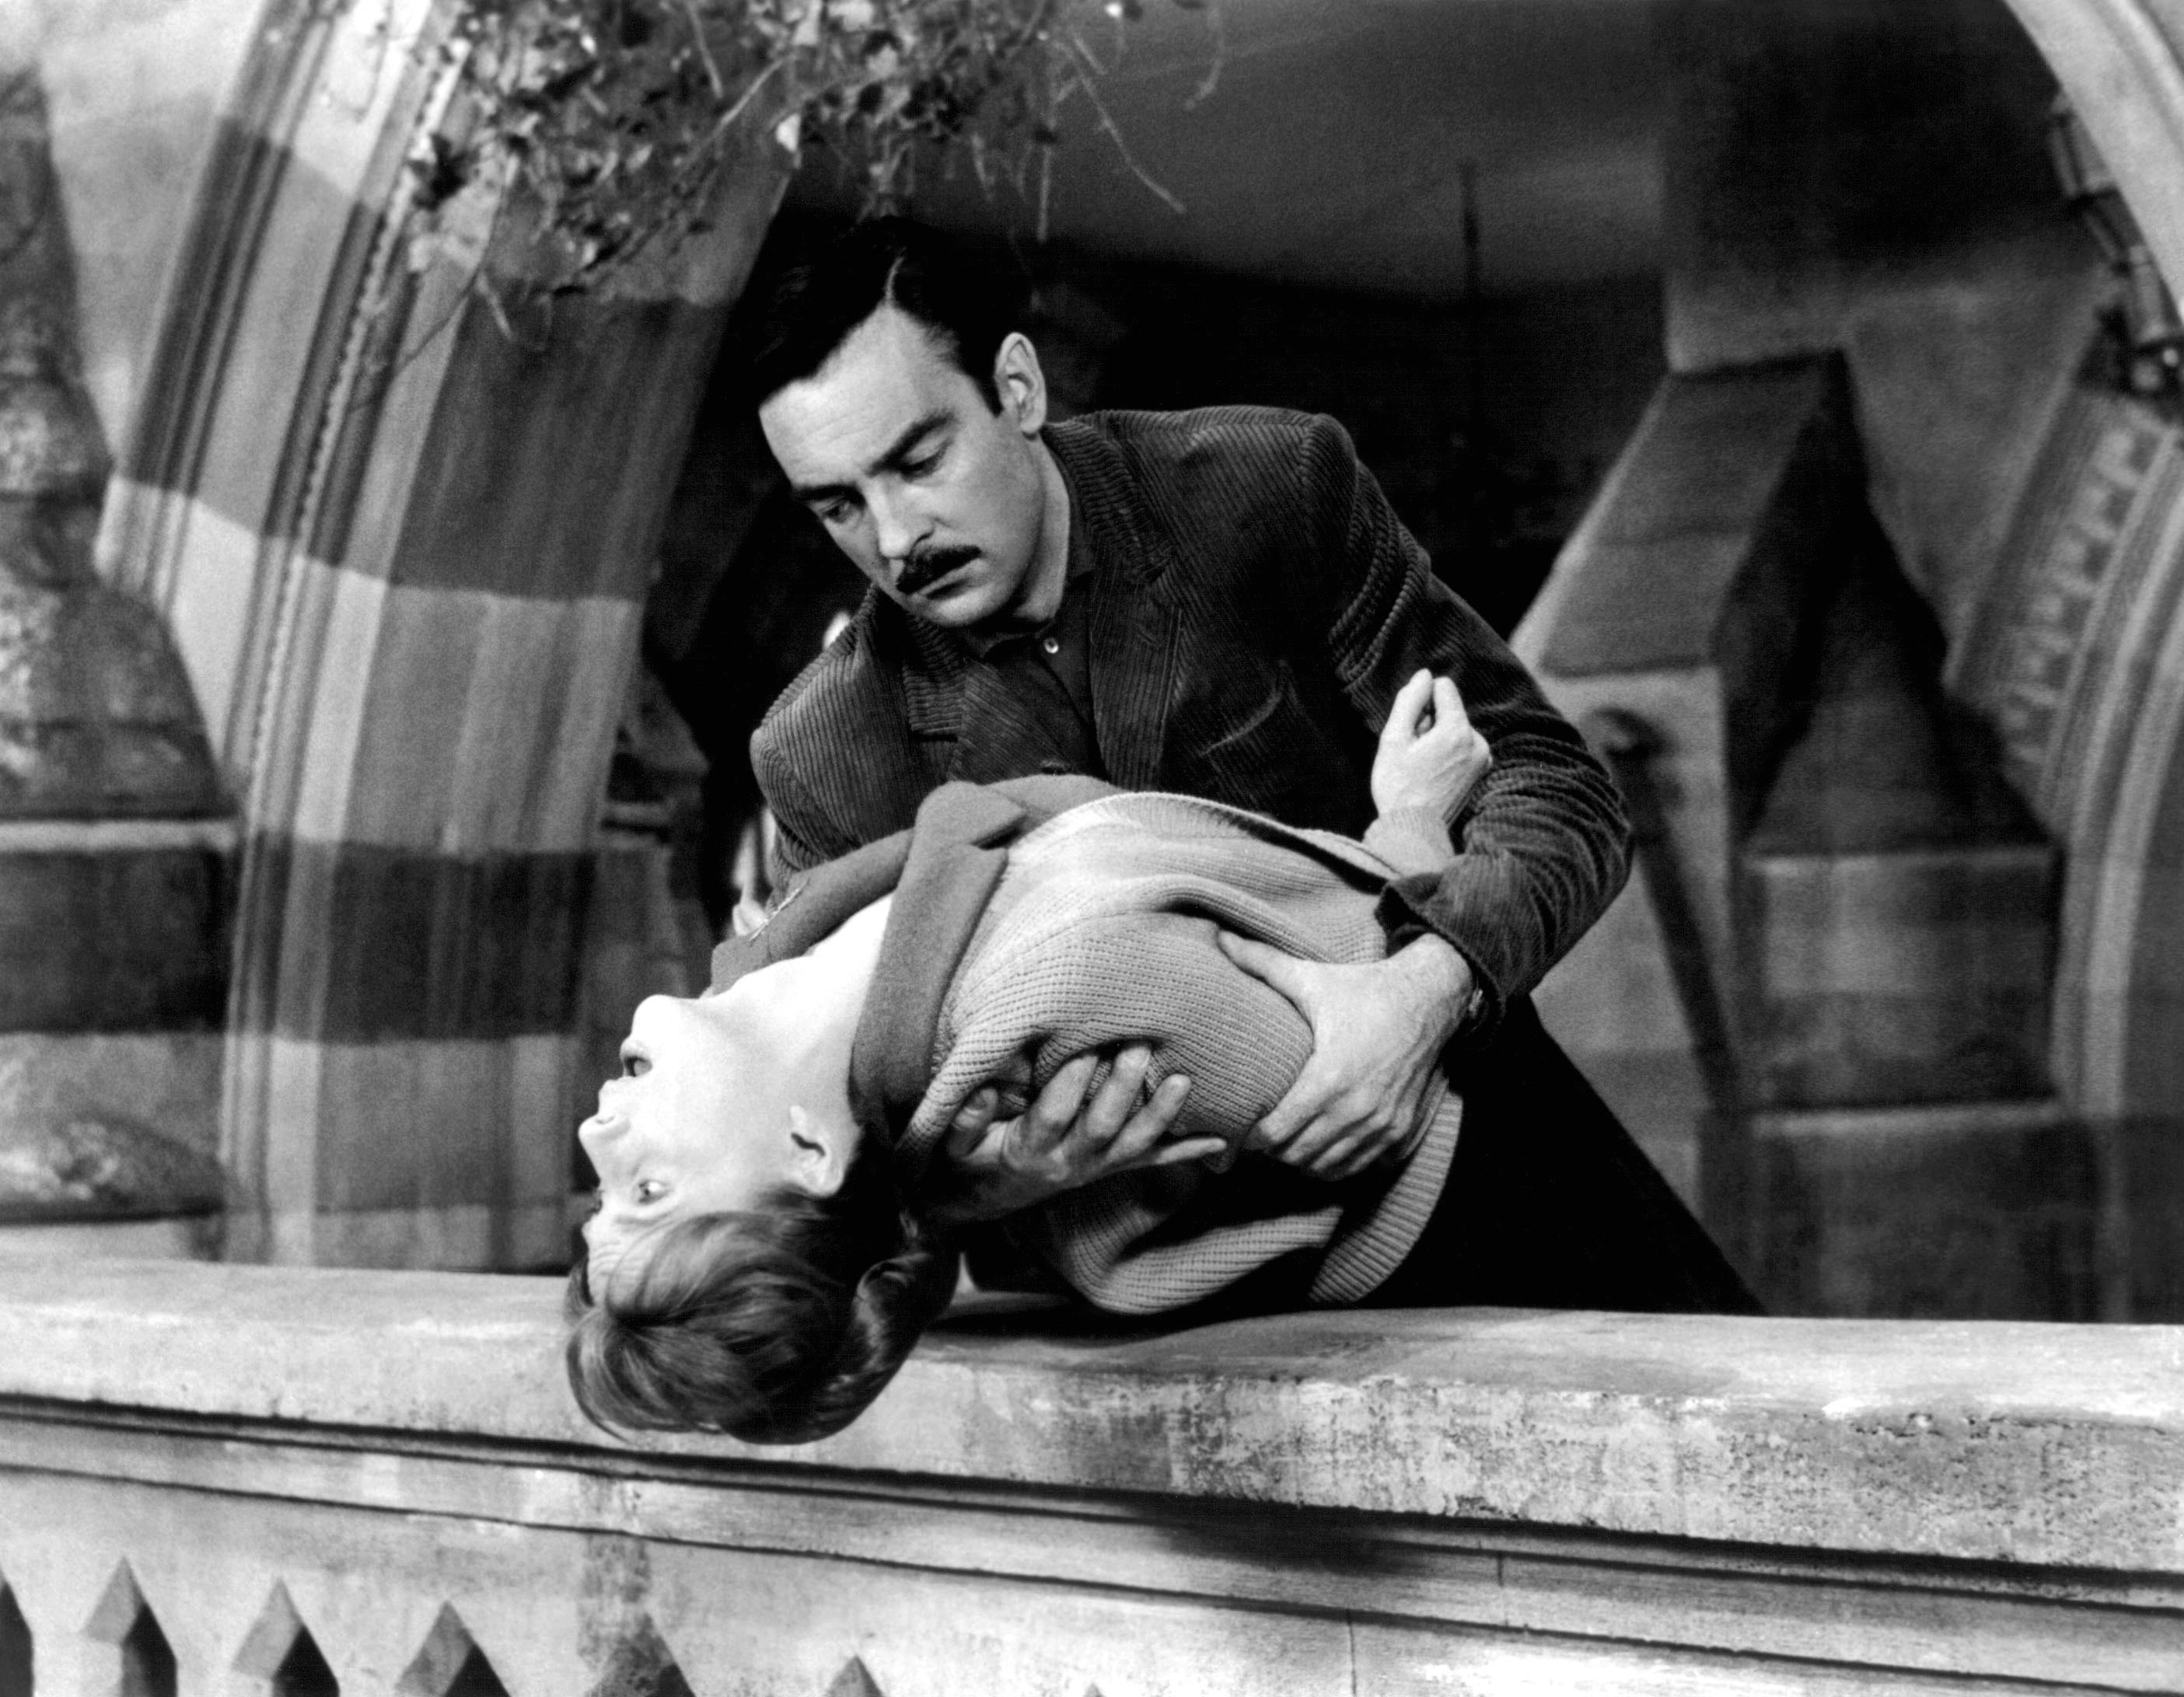 A man, Richard Johnson playing Dr John Markway, holds a woman, Julie Harris playing Eleanor, over a balcony